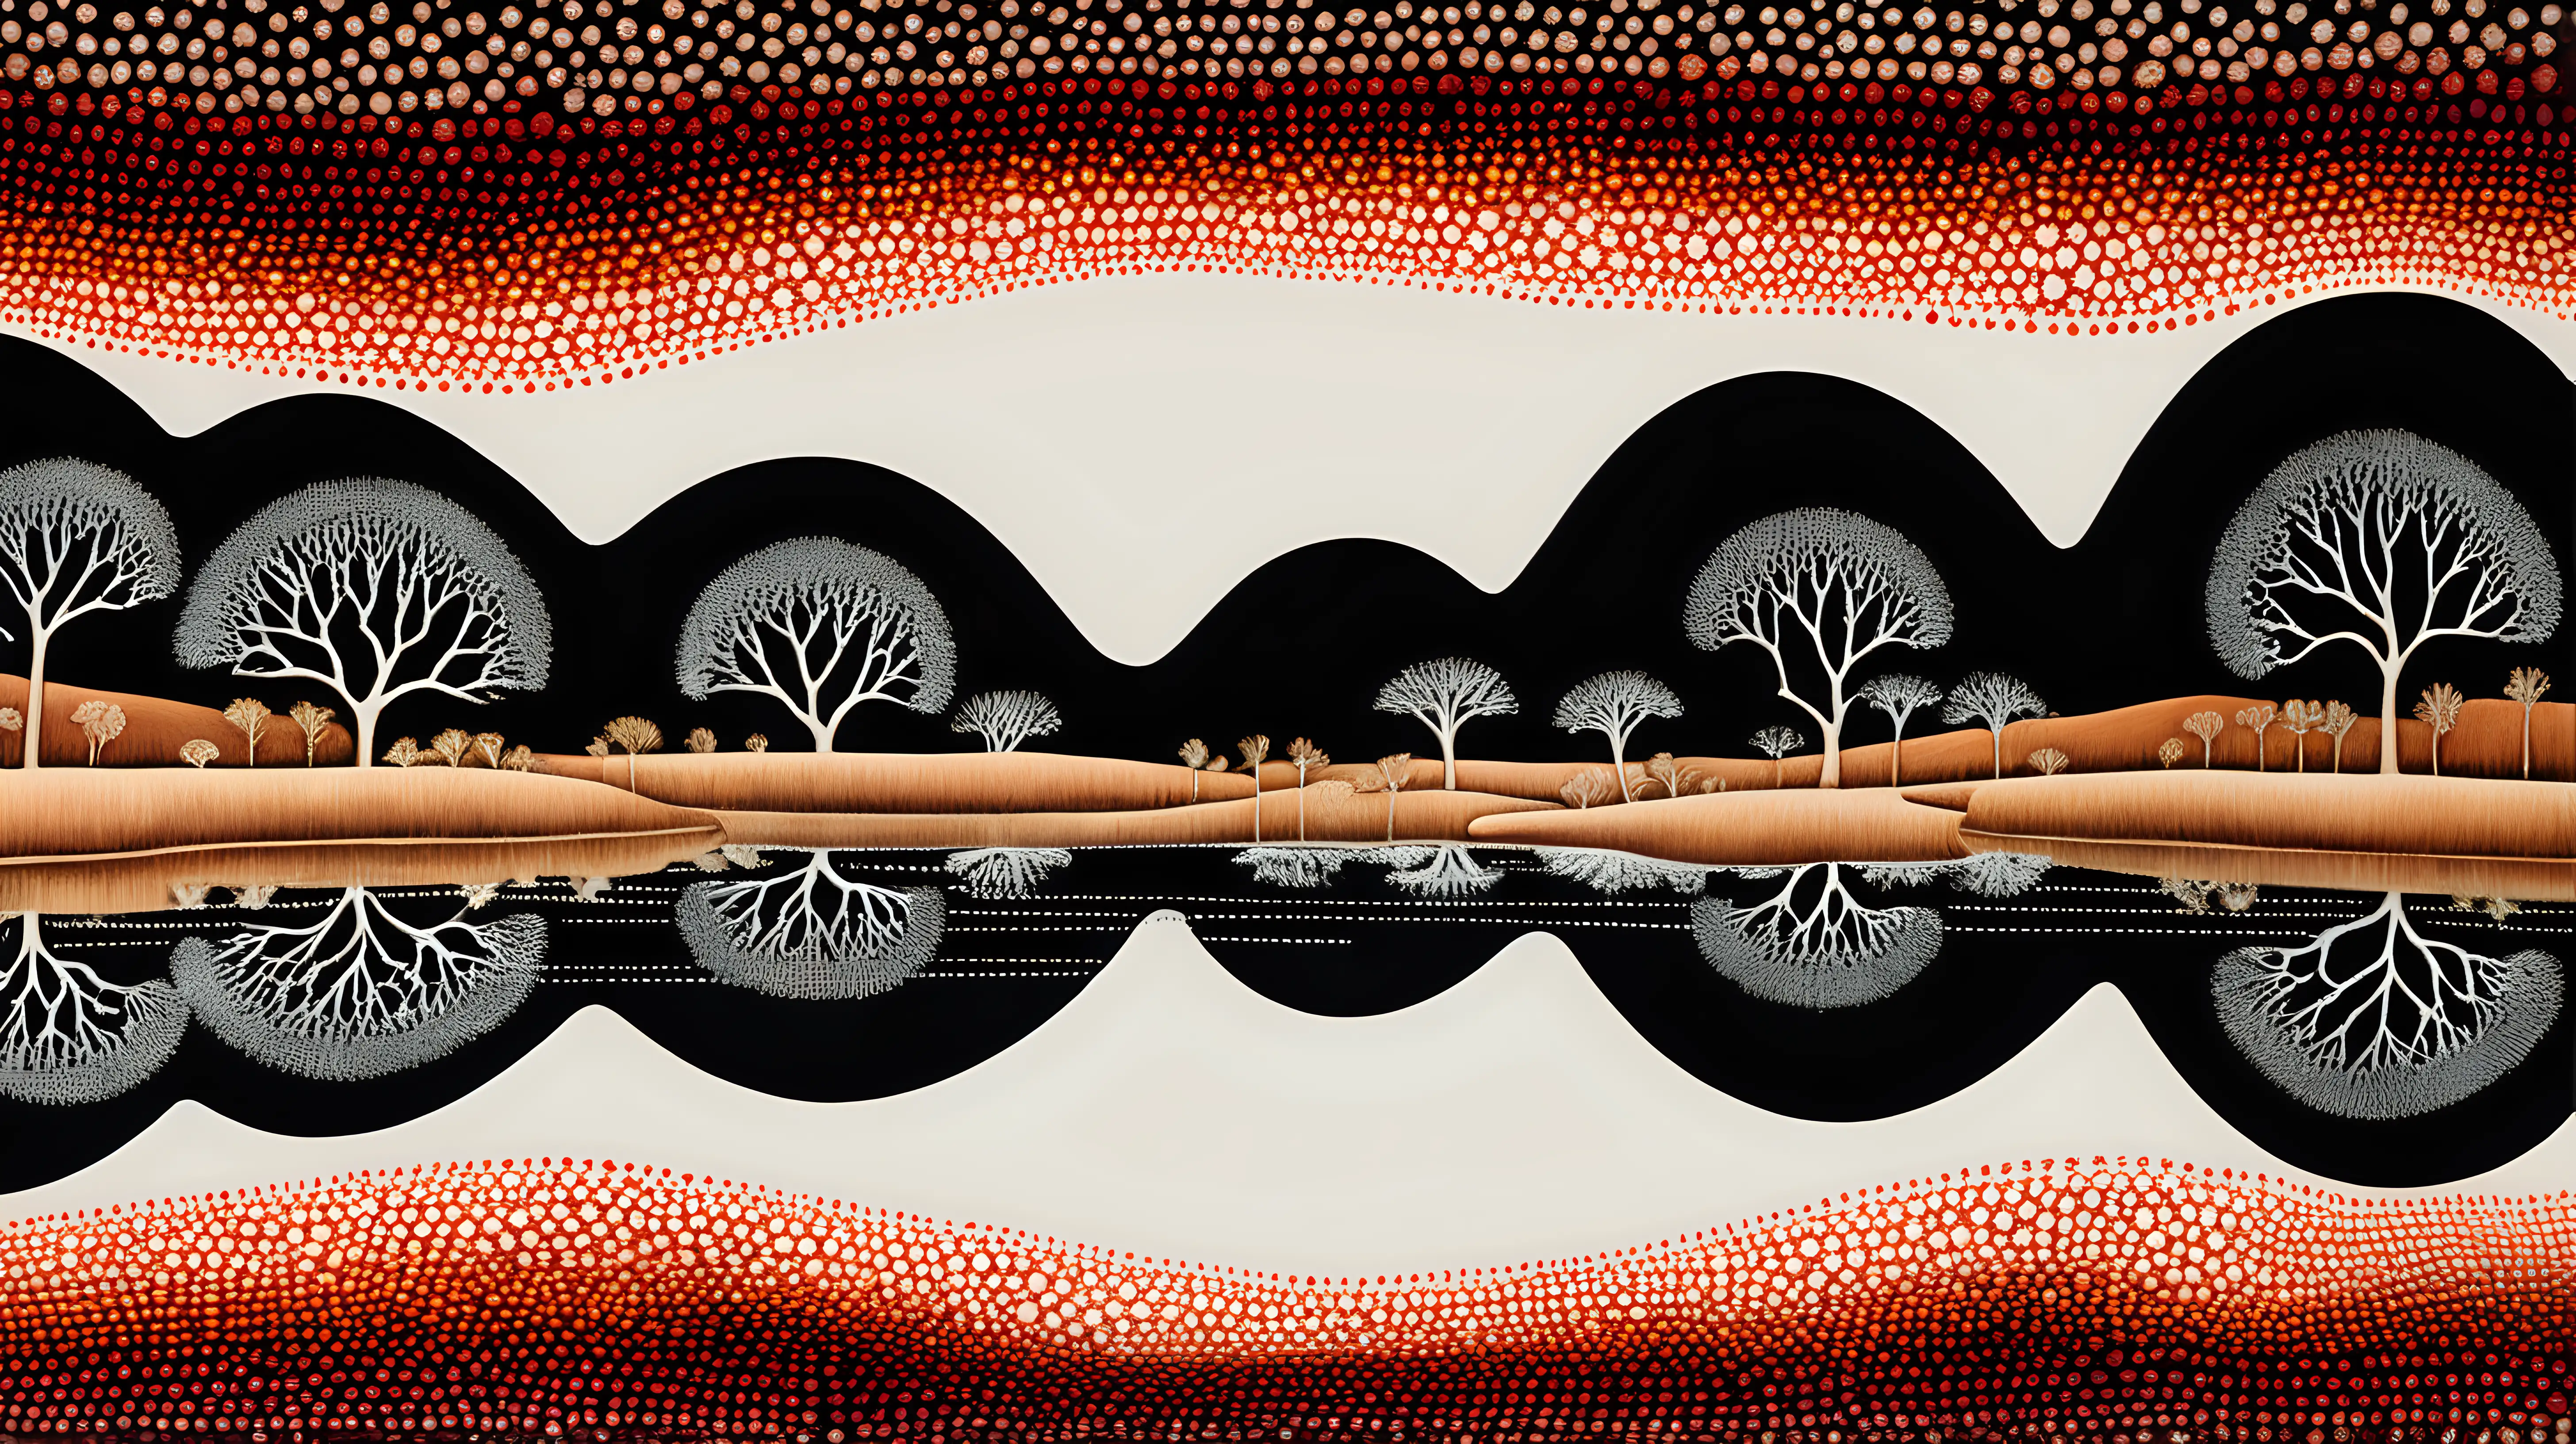 Ainslie Roberts style, Dreamtime dot art, aboriginal australia, lines, watercolor, intricate details, internal bushfire landscape mirrored on water's surface below, colour scheme centred on vibrant cream, white, ochre, red against a stark black, black negative space, backdrop, chiaroscuro enhancing the intricate details, in a digital Rendering “v6”